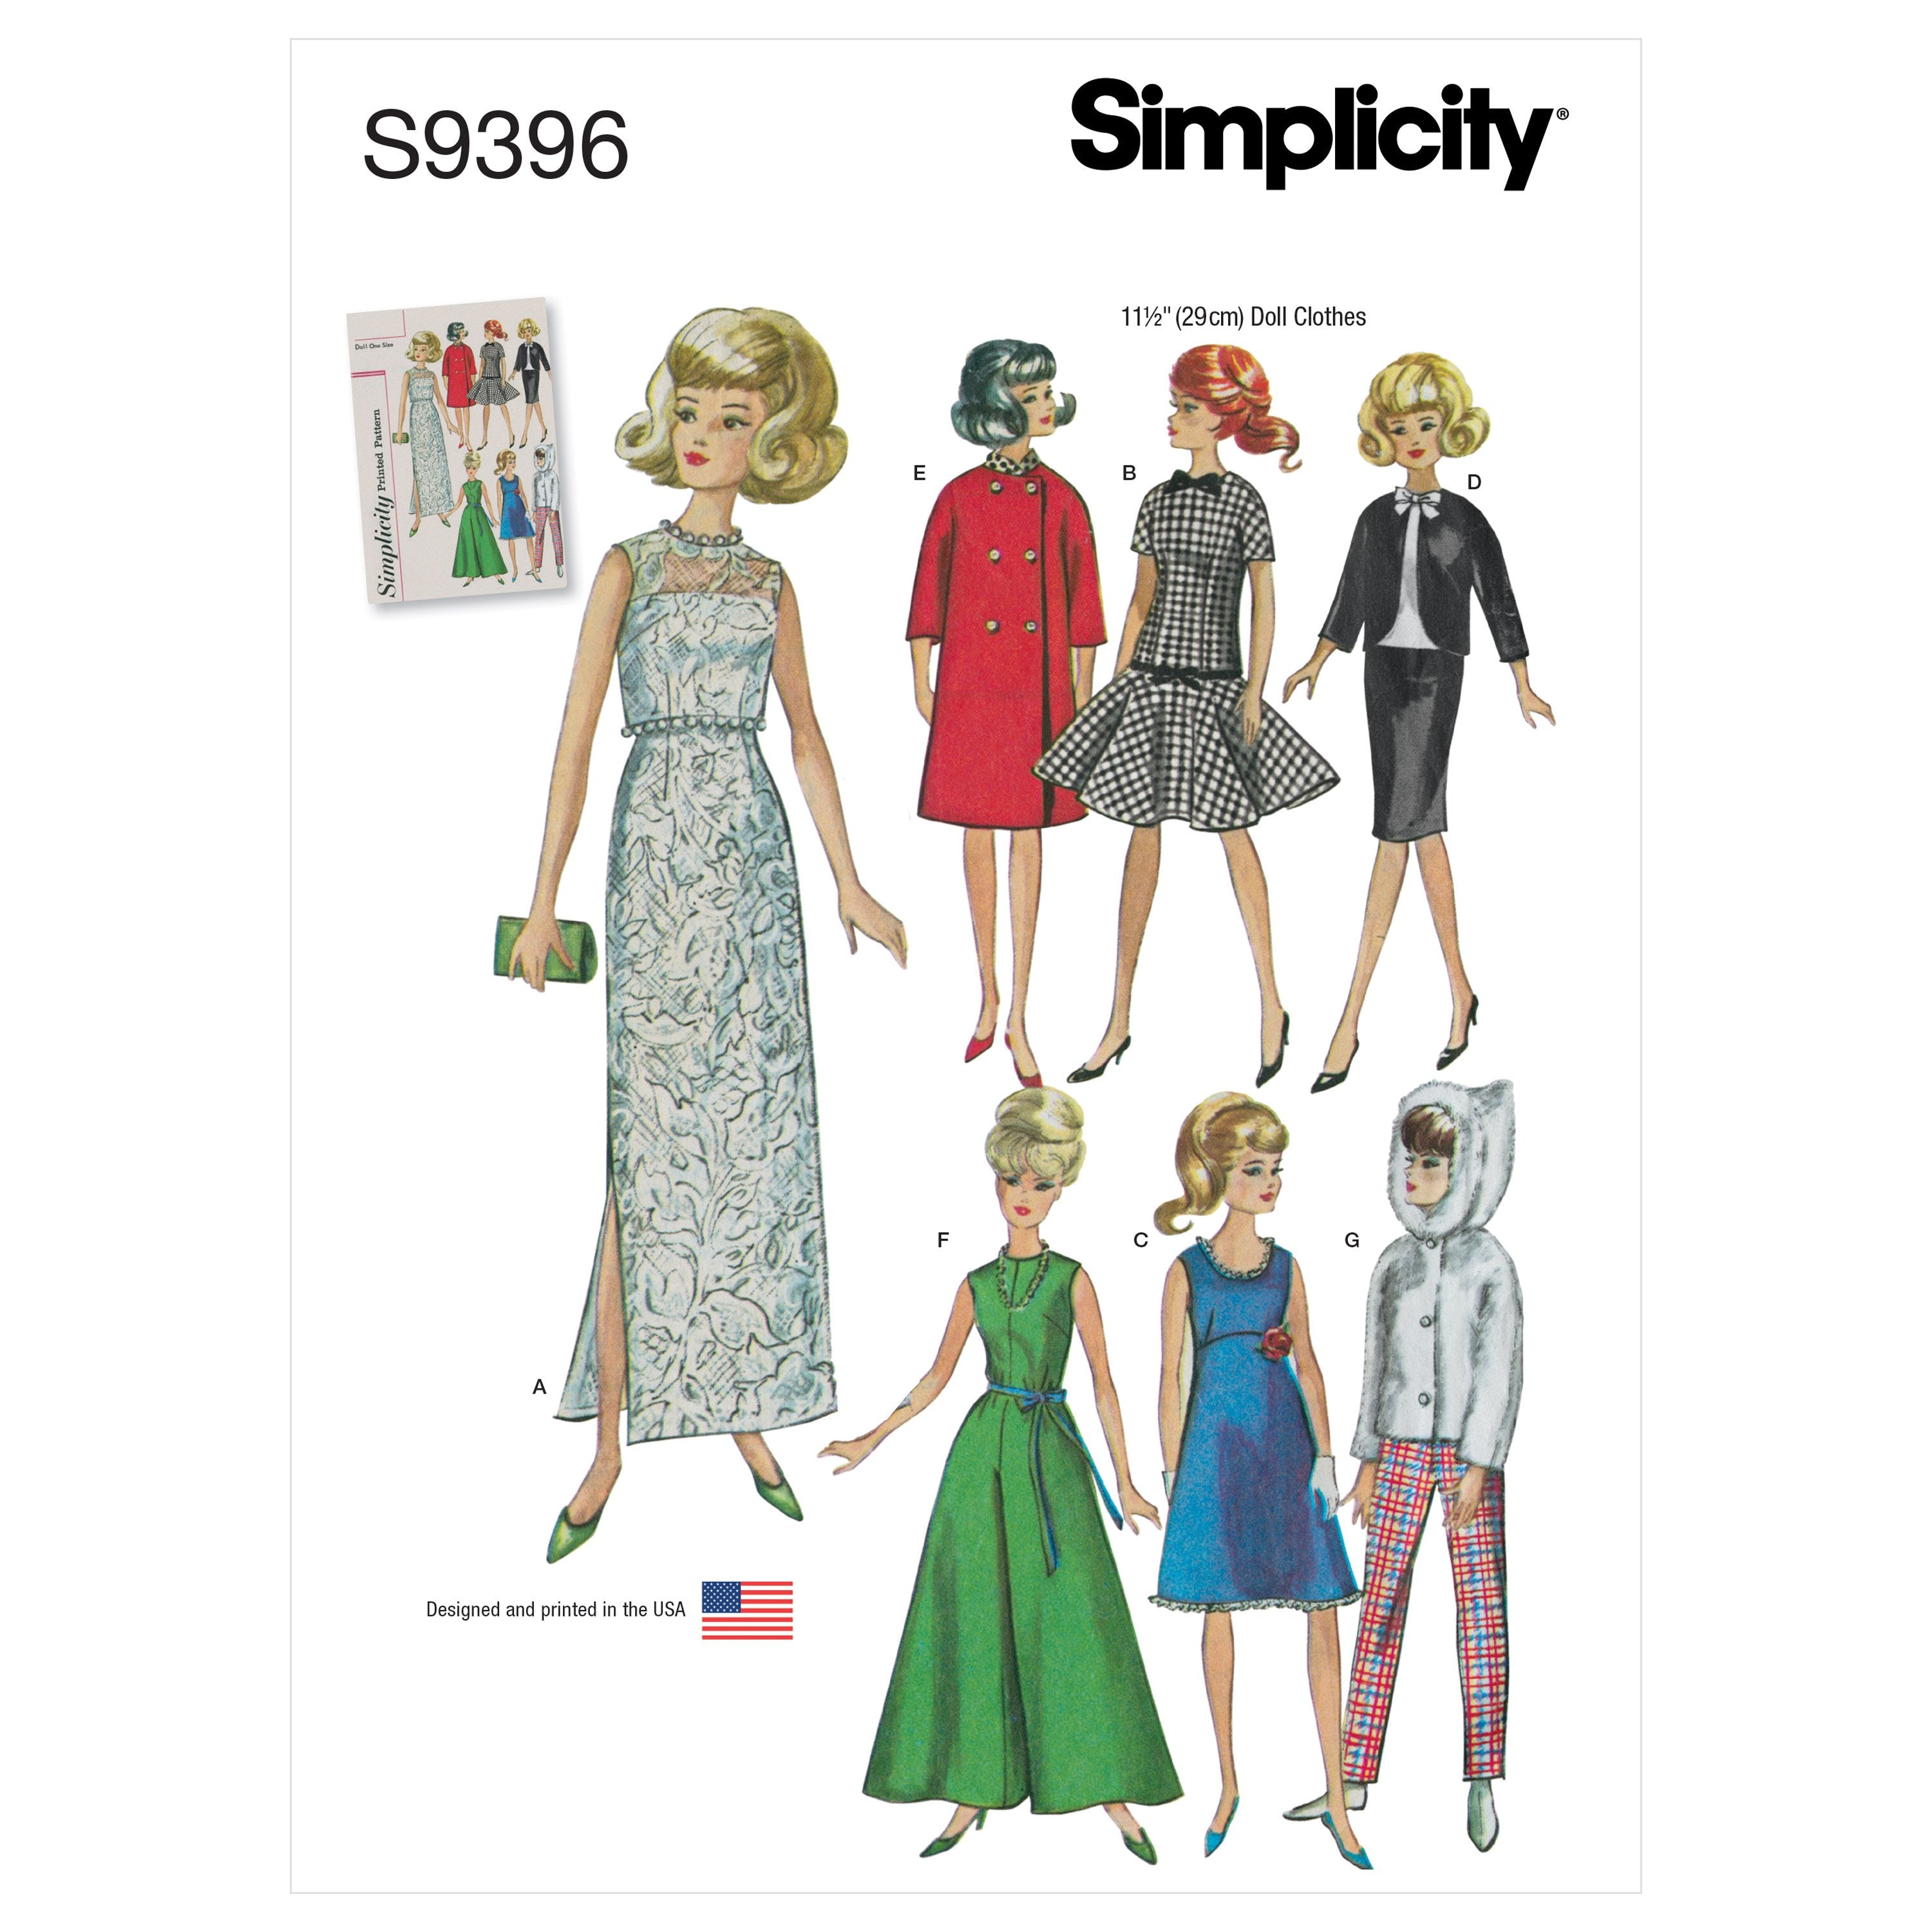 Simplicity Sewing Pattern 9396 Vintage Doll Clothes for 11-1/2" Doll from Jaycotts Sewing Supplies